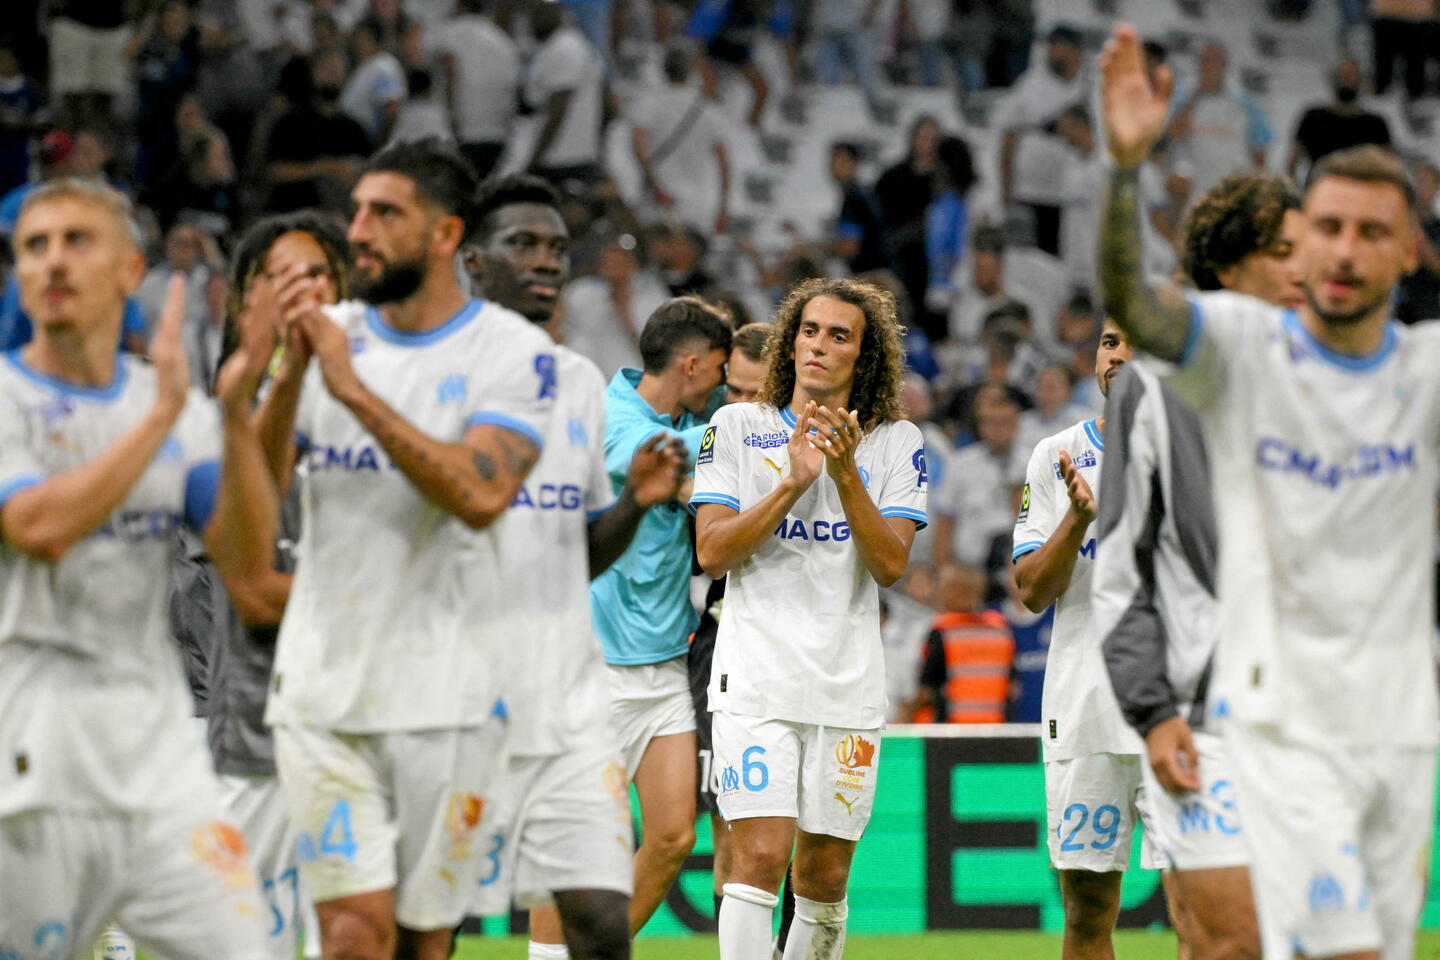 Marseille wins over Brest and takes first place